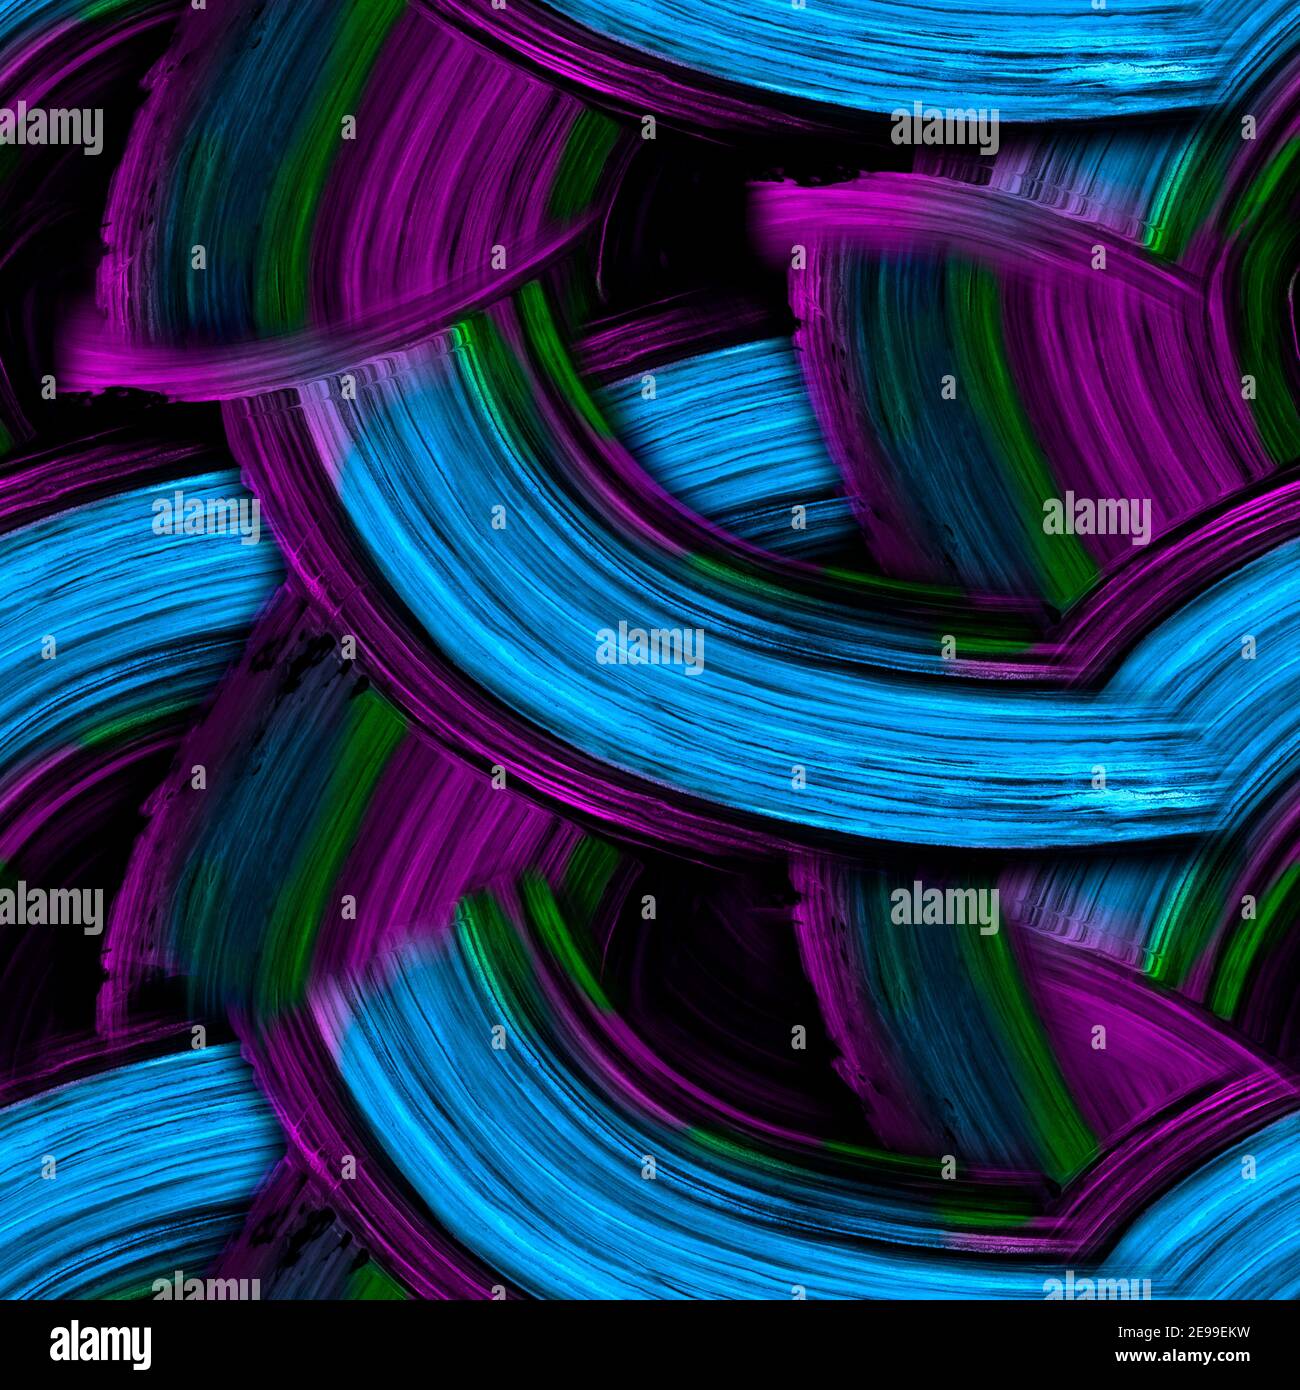 Creative neon abstract hand painted background, violet blue green brush  stroke texture, dark abstract painting for wallpapers, posters, cards,  invitat Stock Photo - Alamy